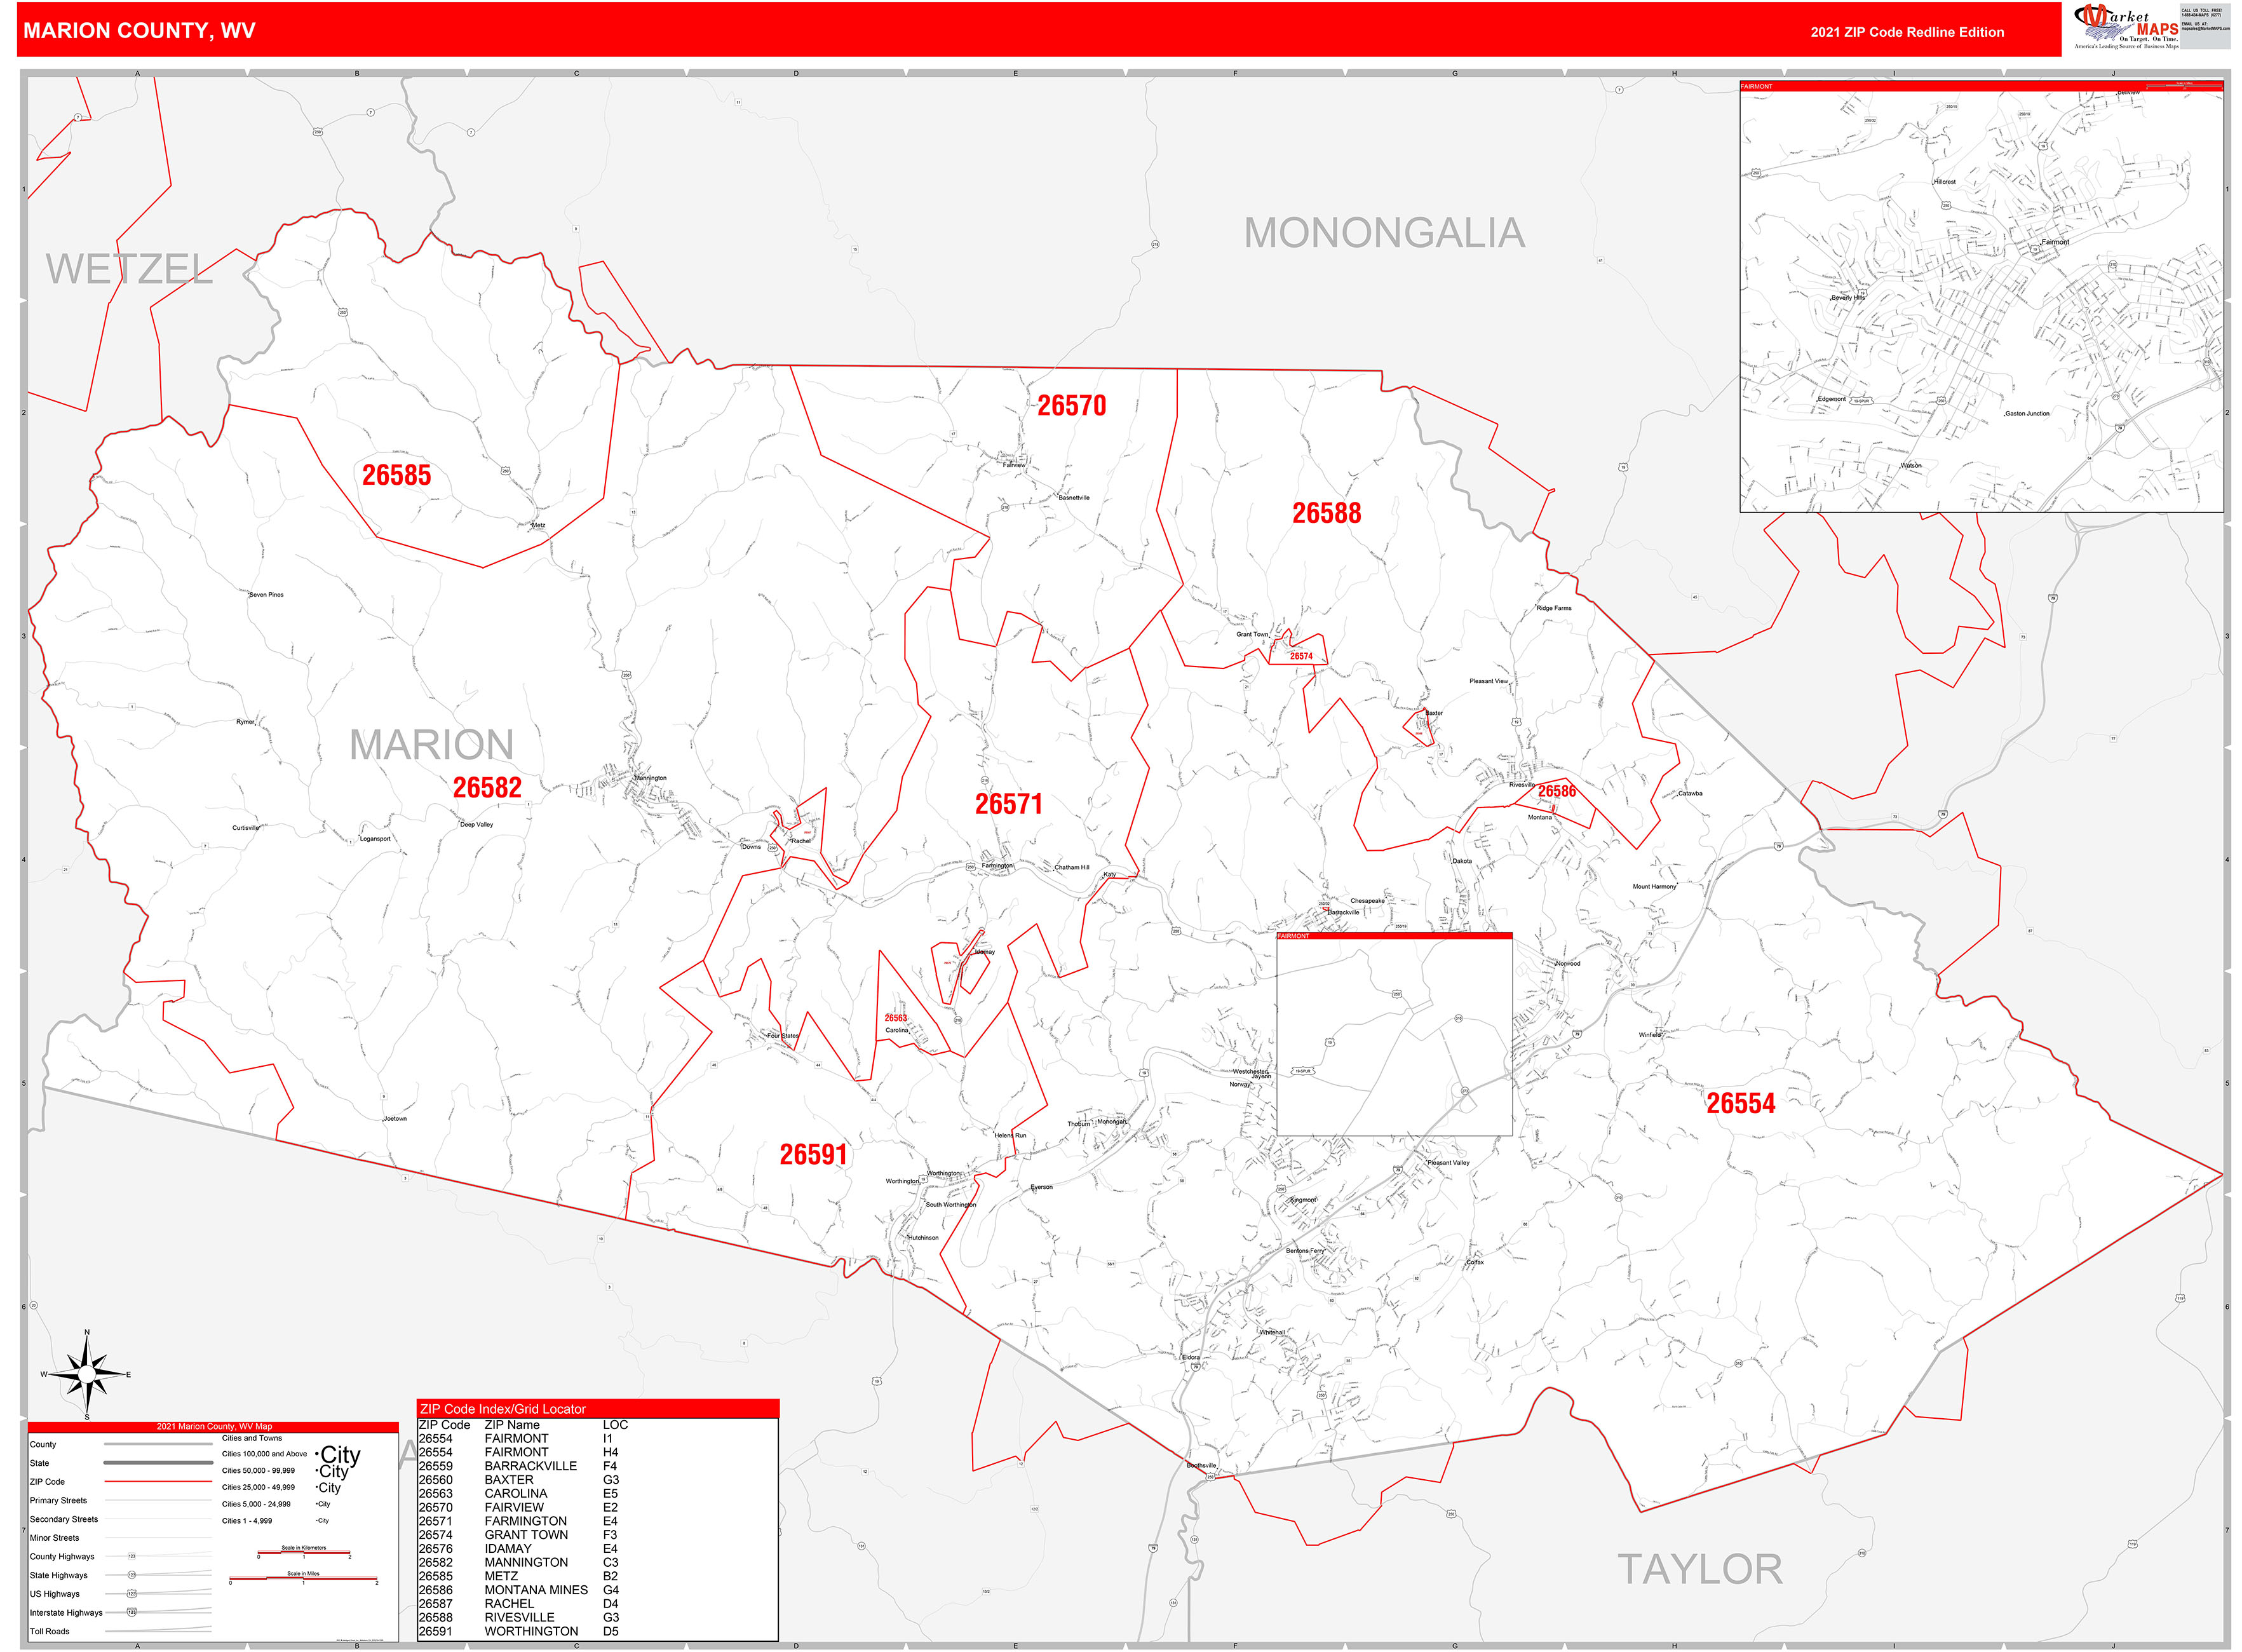 Marion County, WV Zip Code Wall Map Red Line Style by MarketMAPS